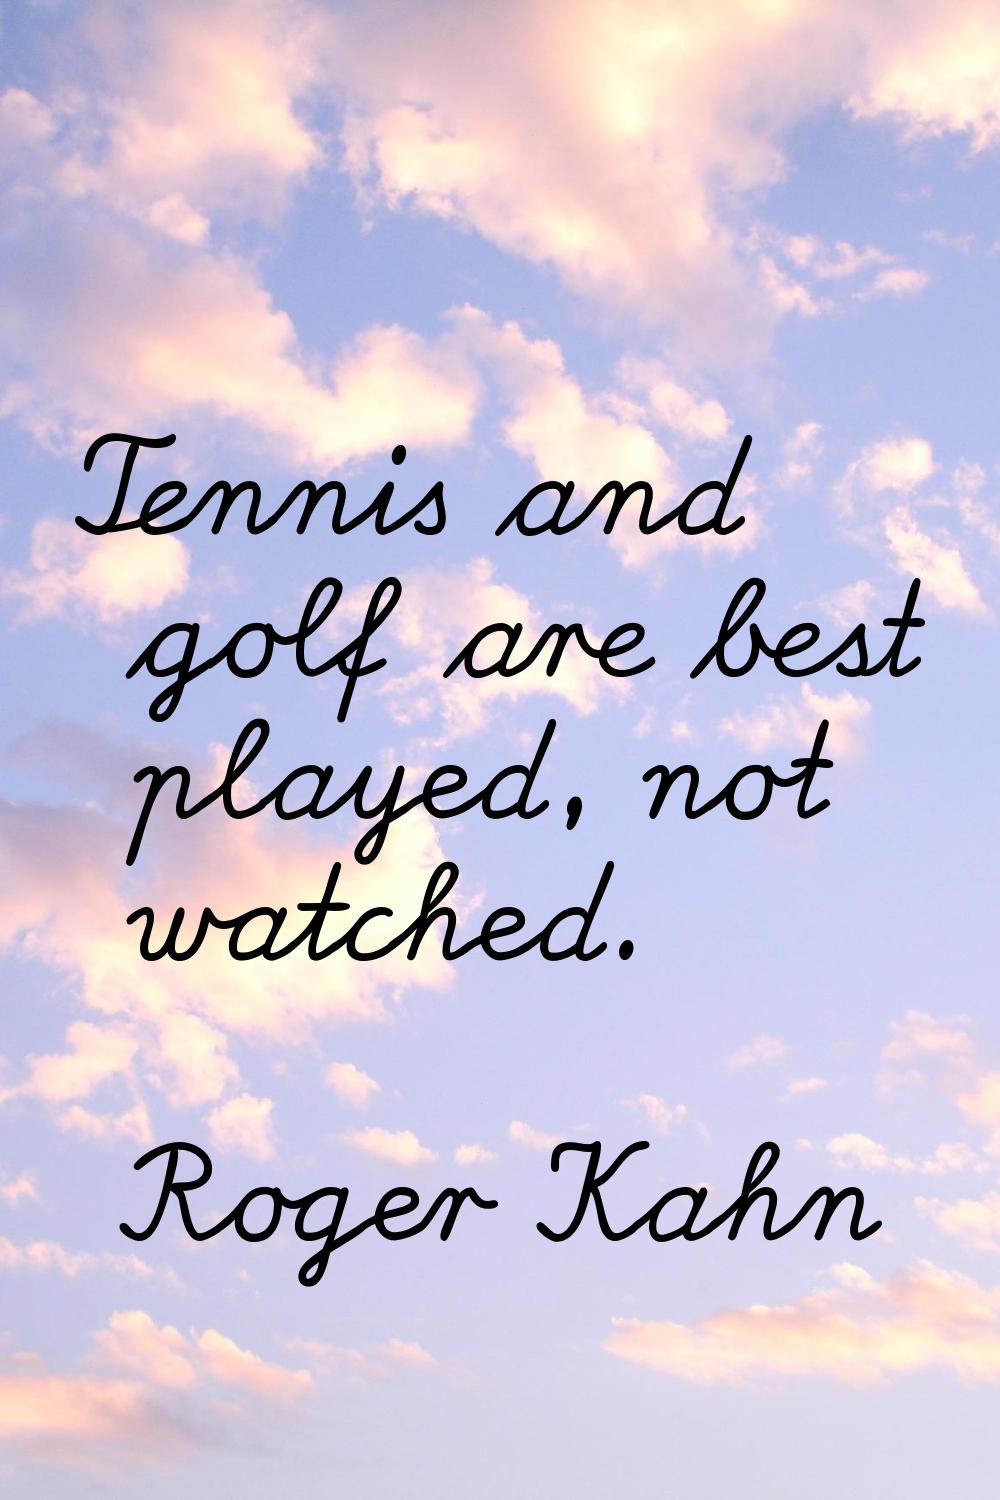 Tennis and golf are best played, not watched.